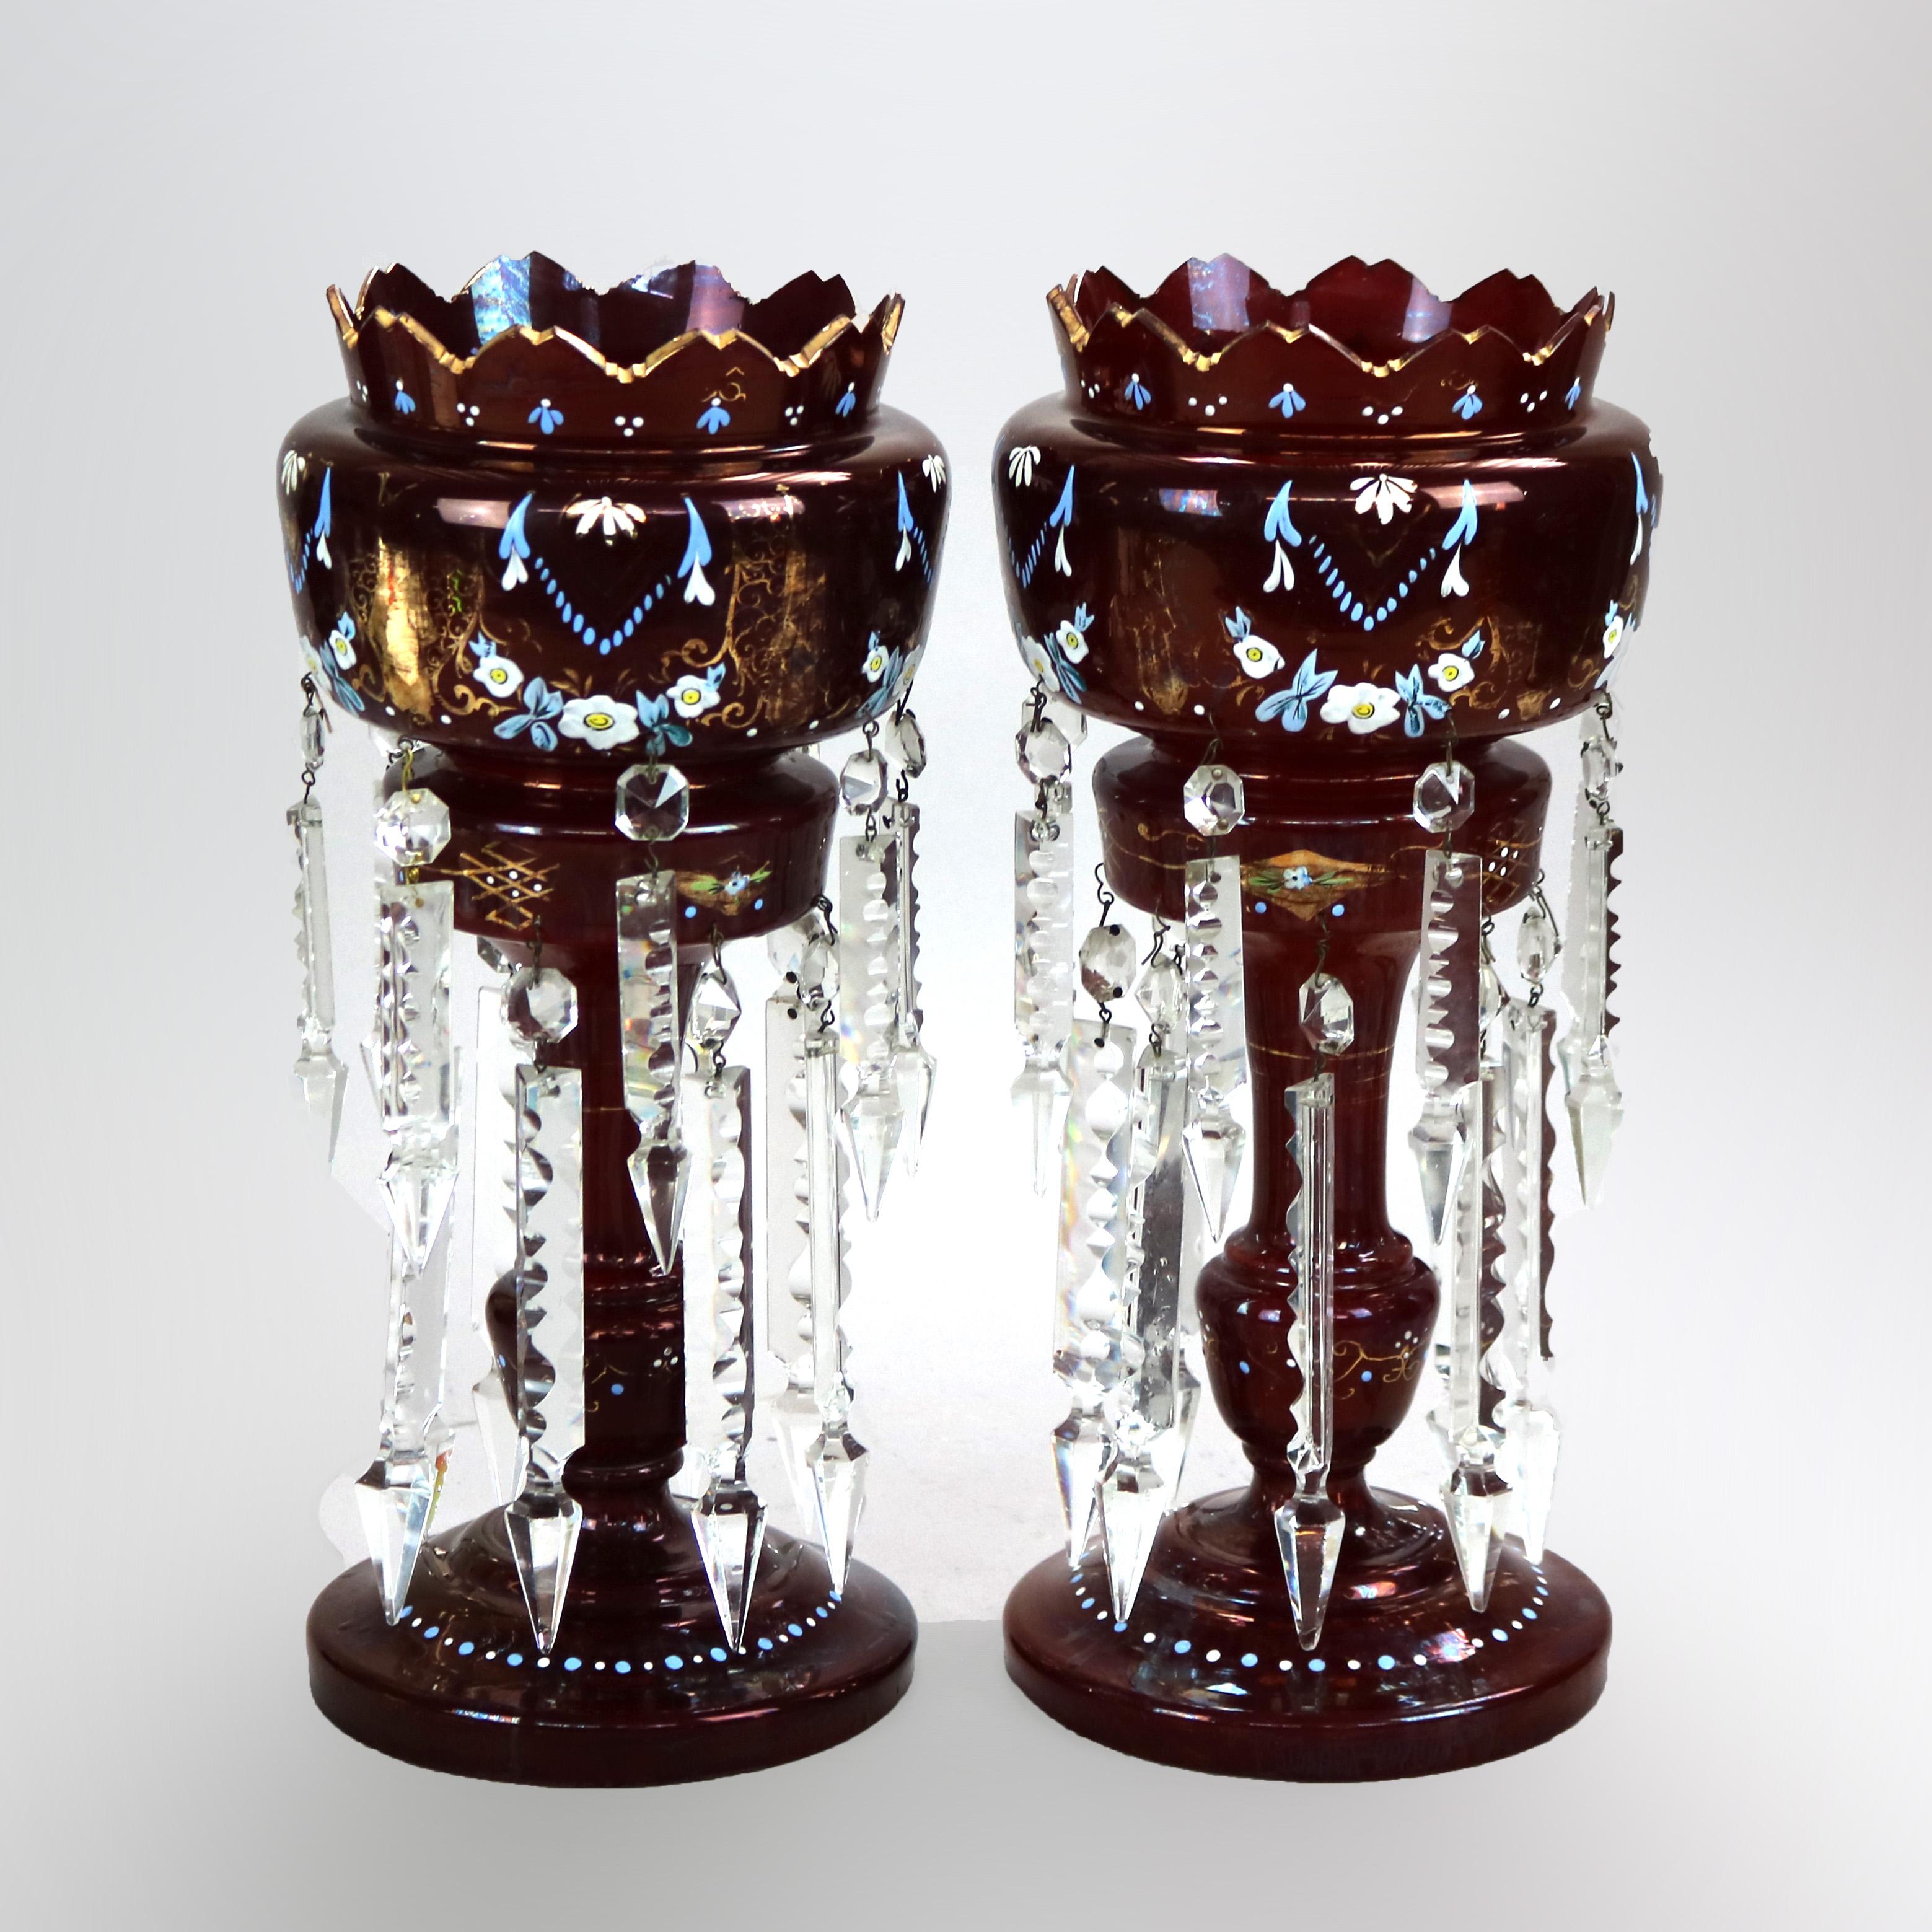 An antique pair of mantel lusters offer cranberry glass construction in urn form with serrated rim, hand painted floral decoration, gilt highlights and hanging cut prisms throughout, c1890

Measures - 14.25''H x 6''W x 6''D.